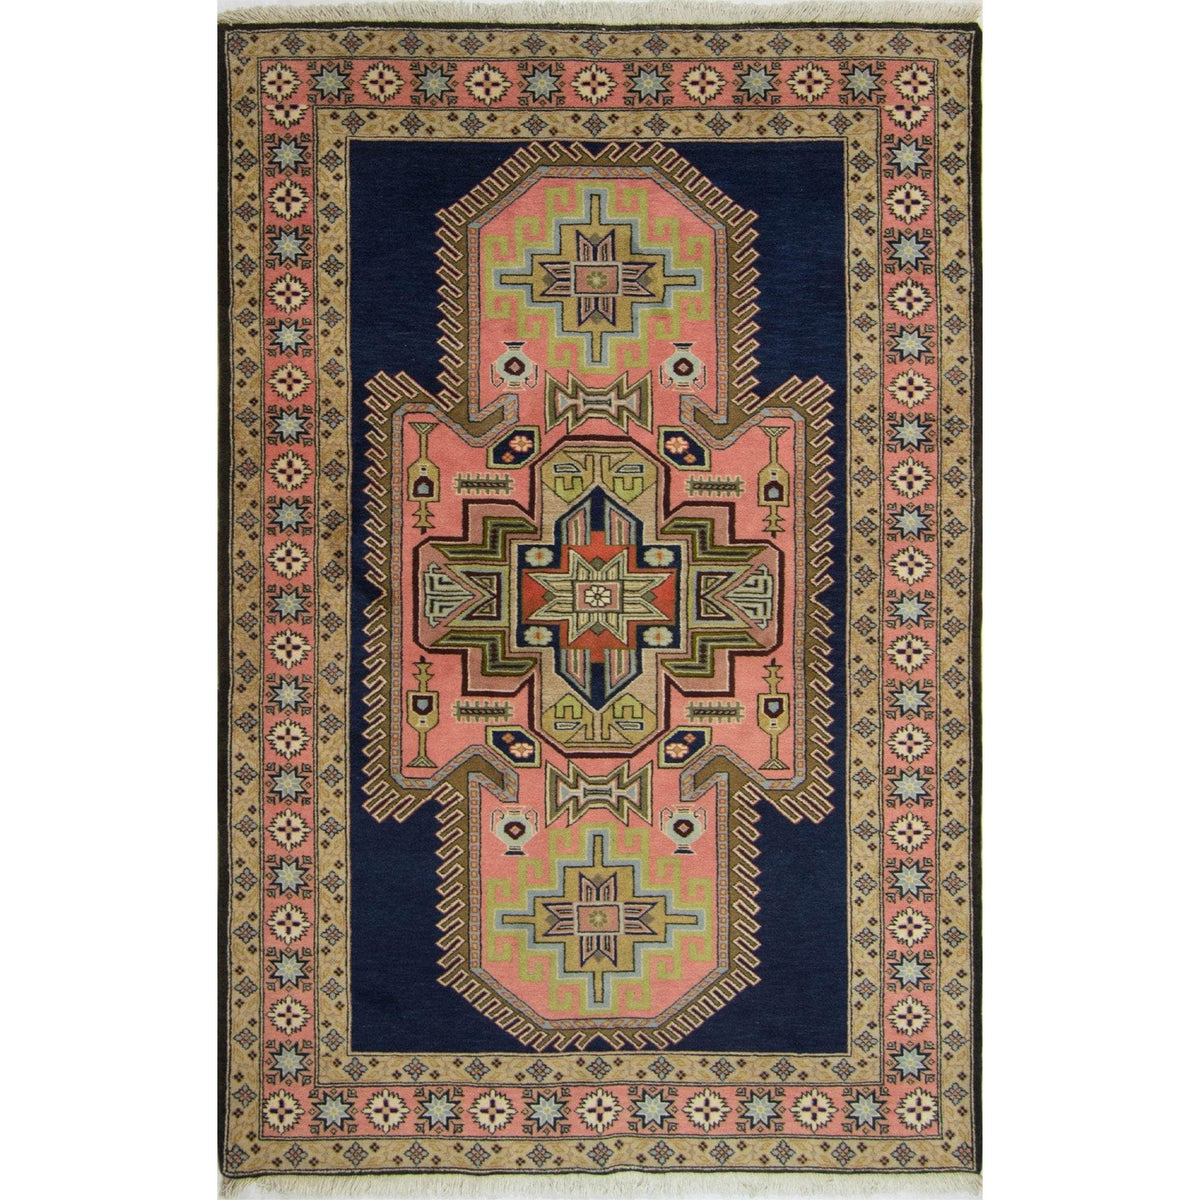 Fine Hand-knotted Wool Persian Ardabil Rug 139cm x 240cm